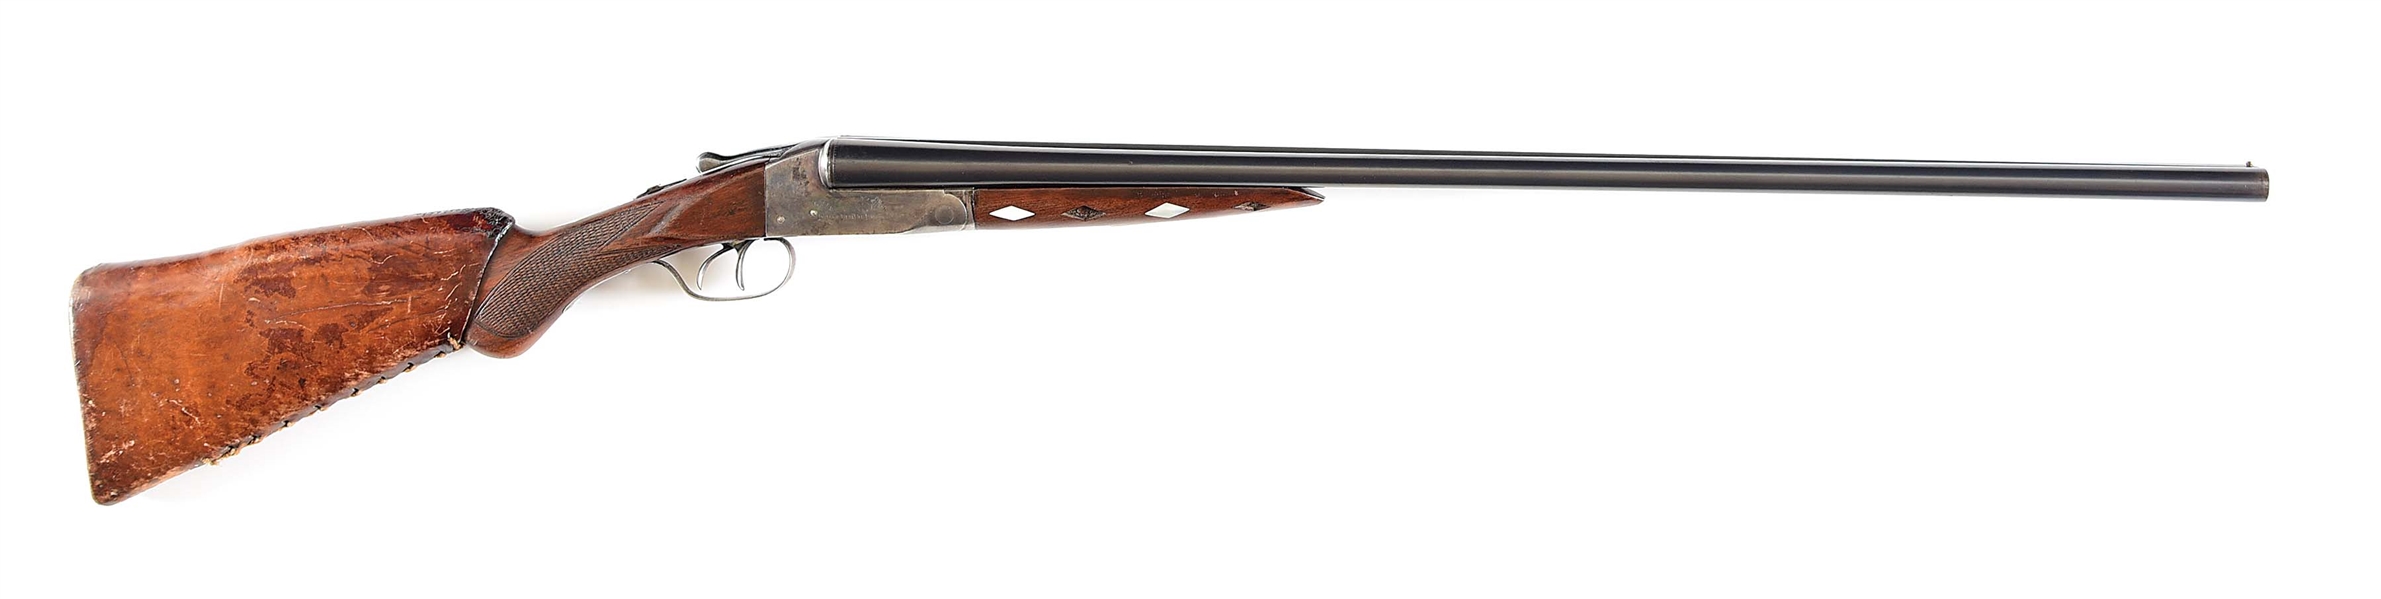 (C) ITHACA FIELD GRADE SIDE BY SIDE SHOTGUN WITH FAMILY HISTORY.